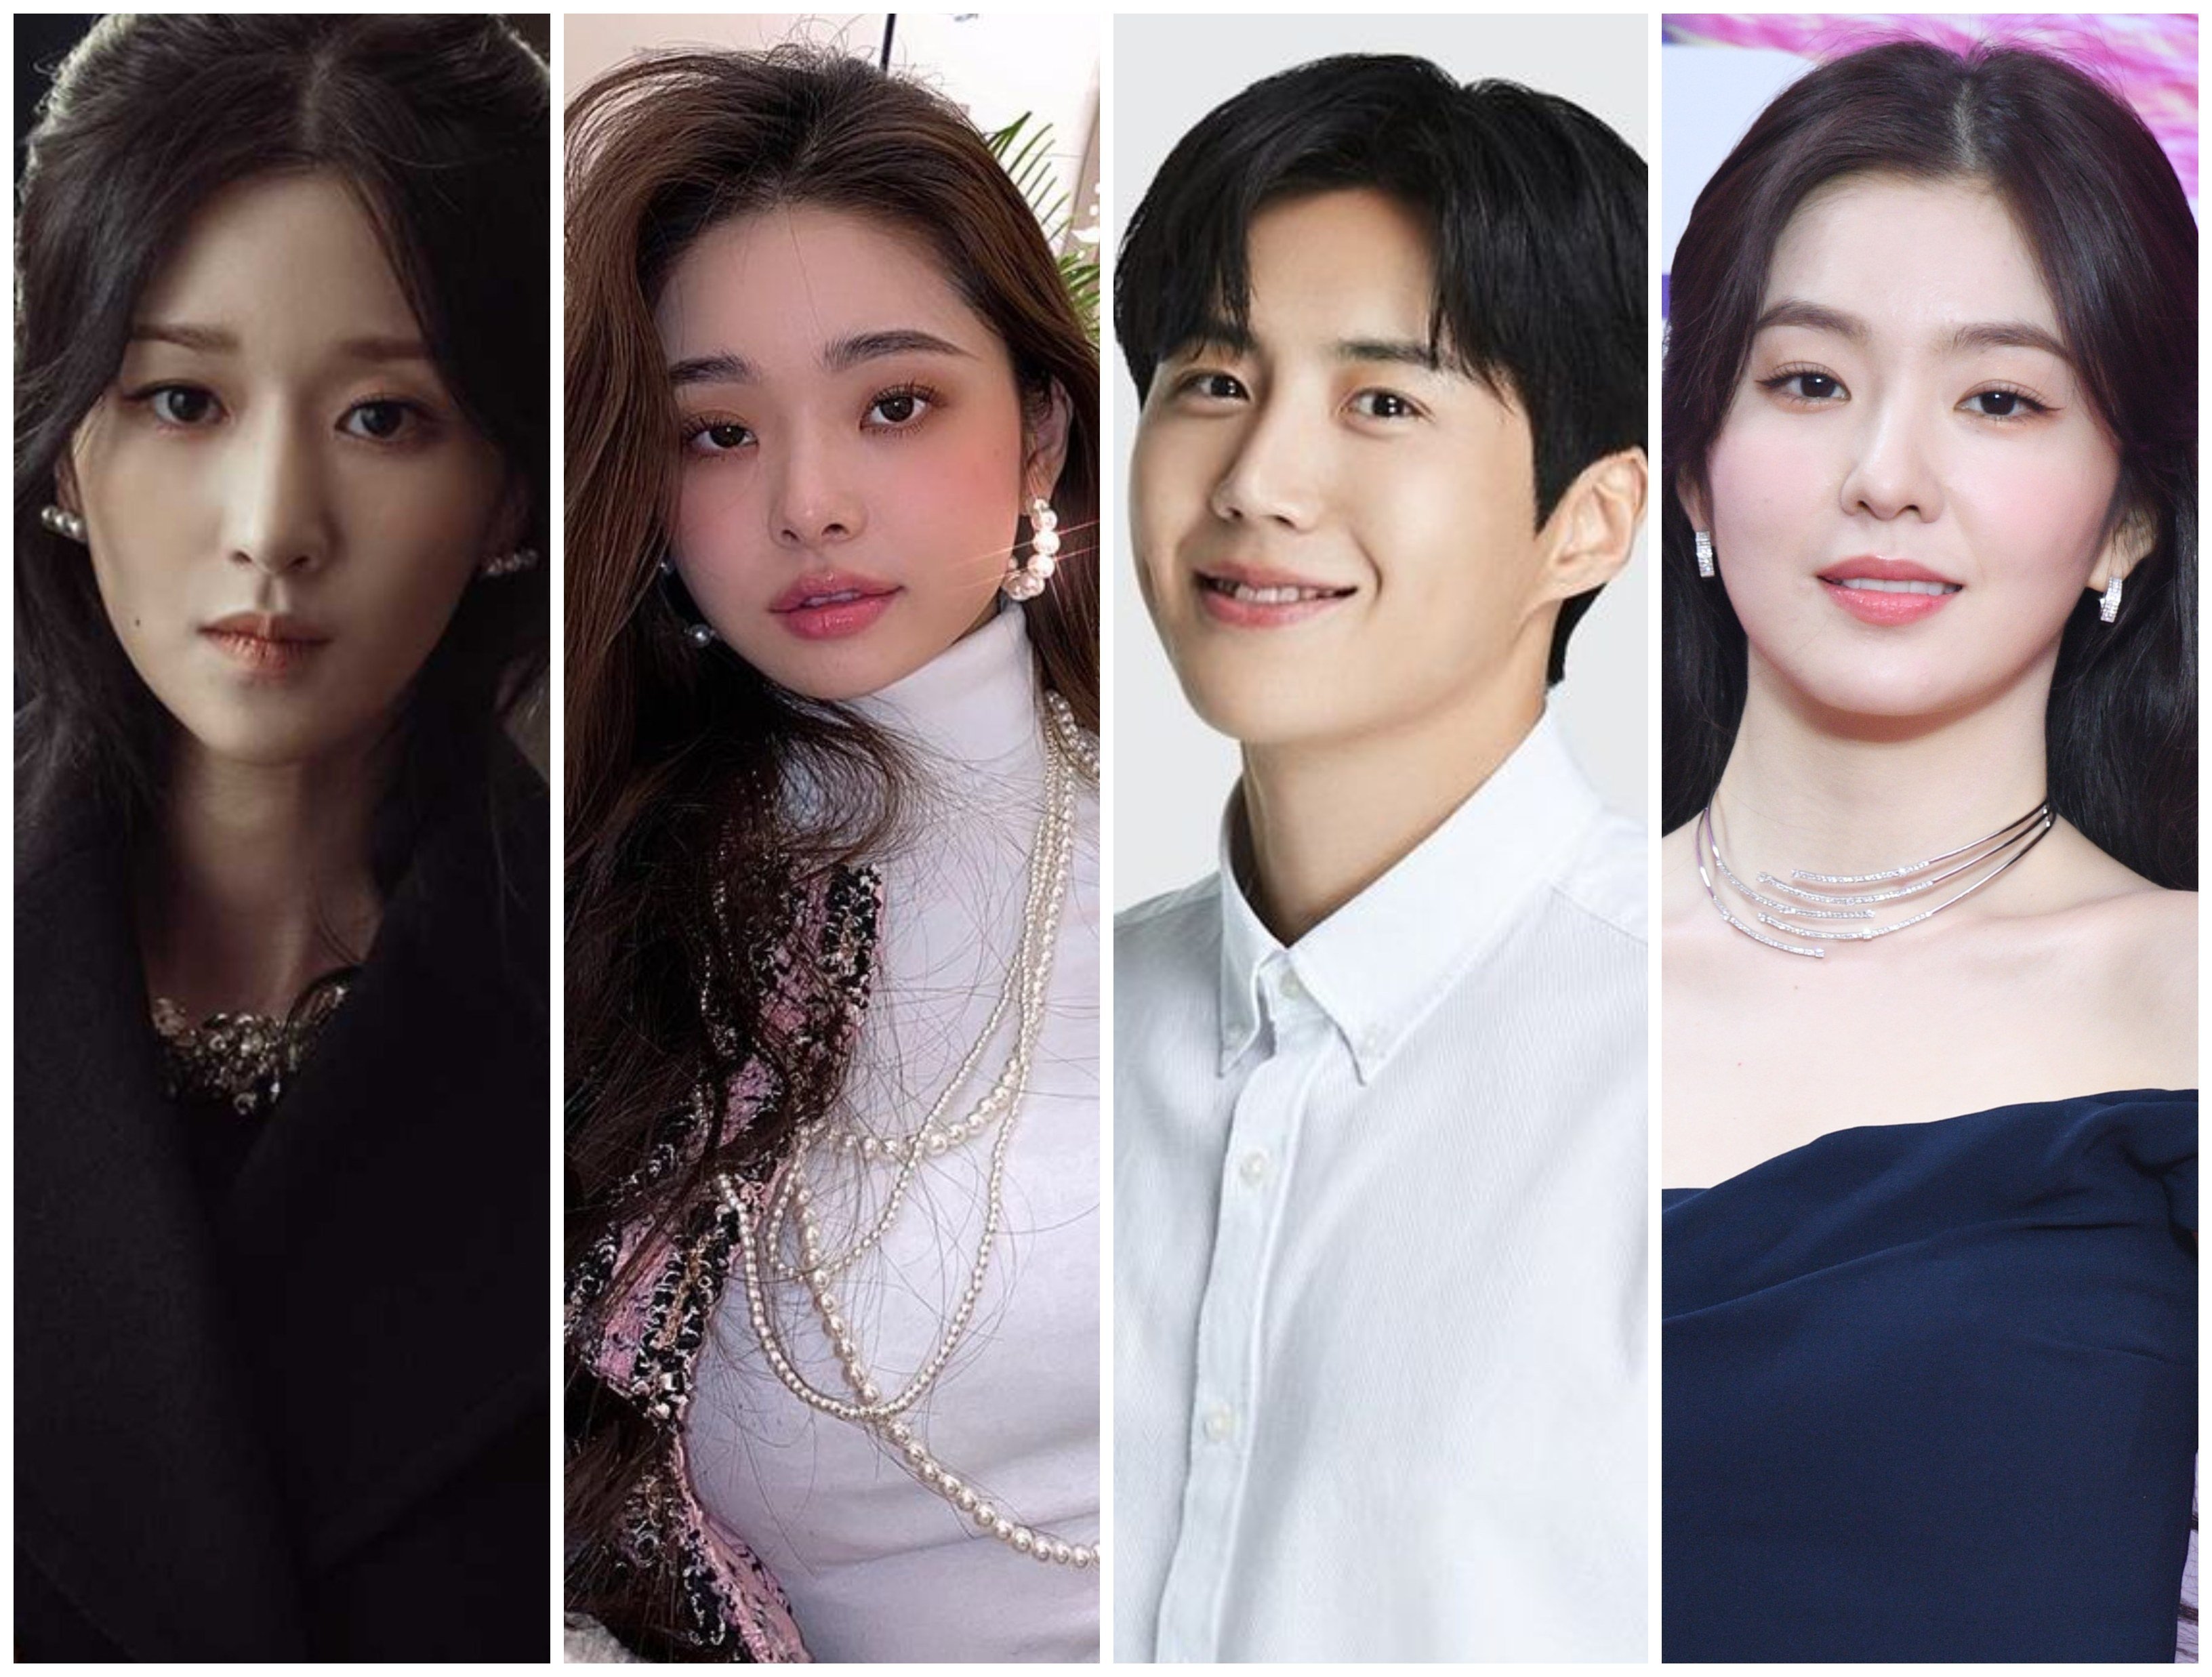 Sea Ye-ji, Song Ji-a, Kim Seon-ho and Red Velvet’s Irene all got caught up in scandals that threatened to end their careers – but didn’t. Photos: tvN; @dear.zia/Instagram; @foodbucket_official/Instagram; Getty Images